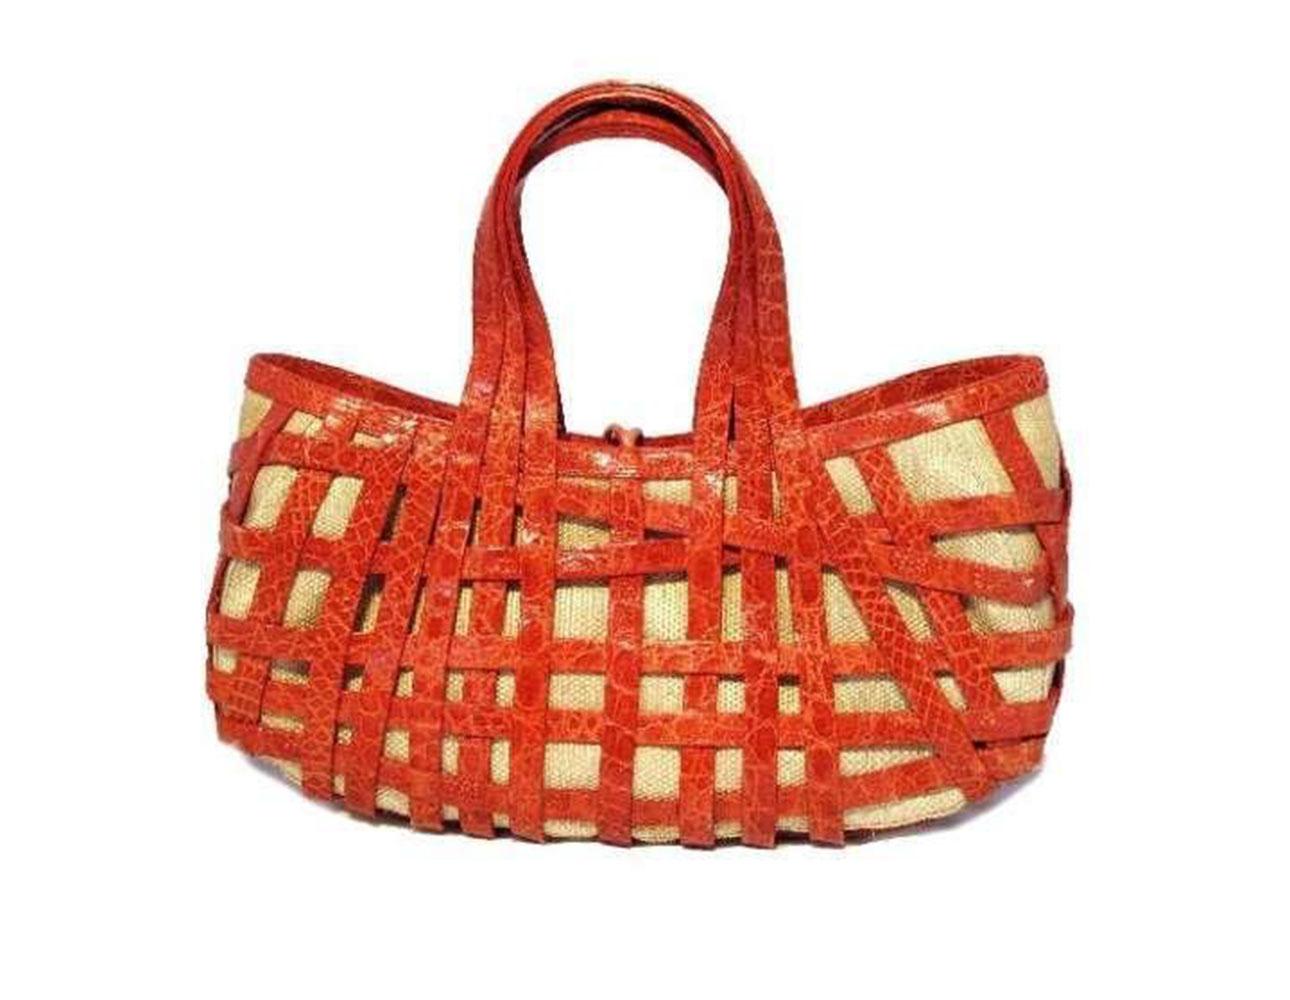 This wonderful Nancy Gonzalez handbag is in excellent condition. The exterior features an intricate basket pattern of red crocodile leather surrounding a beige underlining. The simple loop closure opens to a fully lined beige suede interior that